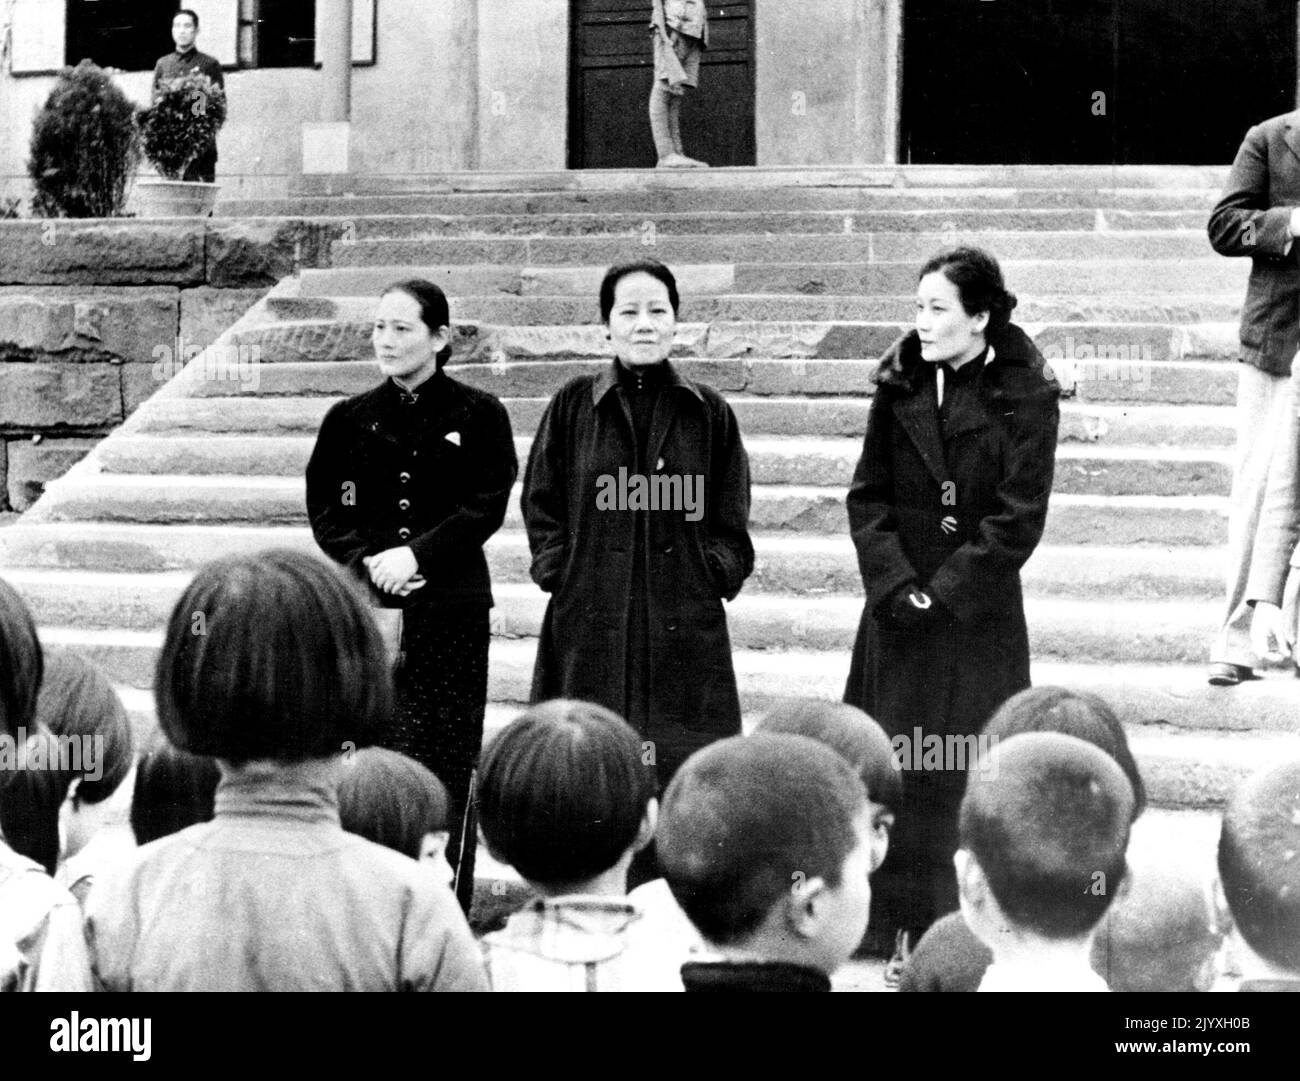 China's Leading Ladies - For the first time the three famous Soong sisters, the first ladies of Nationalistic China are Shown together in the war time Capital of China, Chungking. From left to right to right are Madame H.H Kung, Madame Sun Yat-Sen and Madame Chiang Kai-Shek, Shek. They were photographed during celebration of children's day in Chungking. May 8, 1940. (Photo by International News Photos). Stock Photo